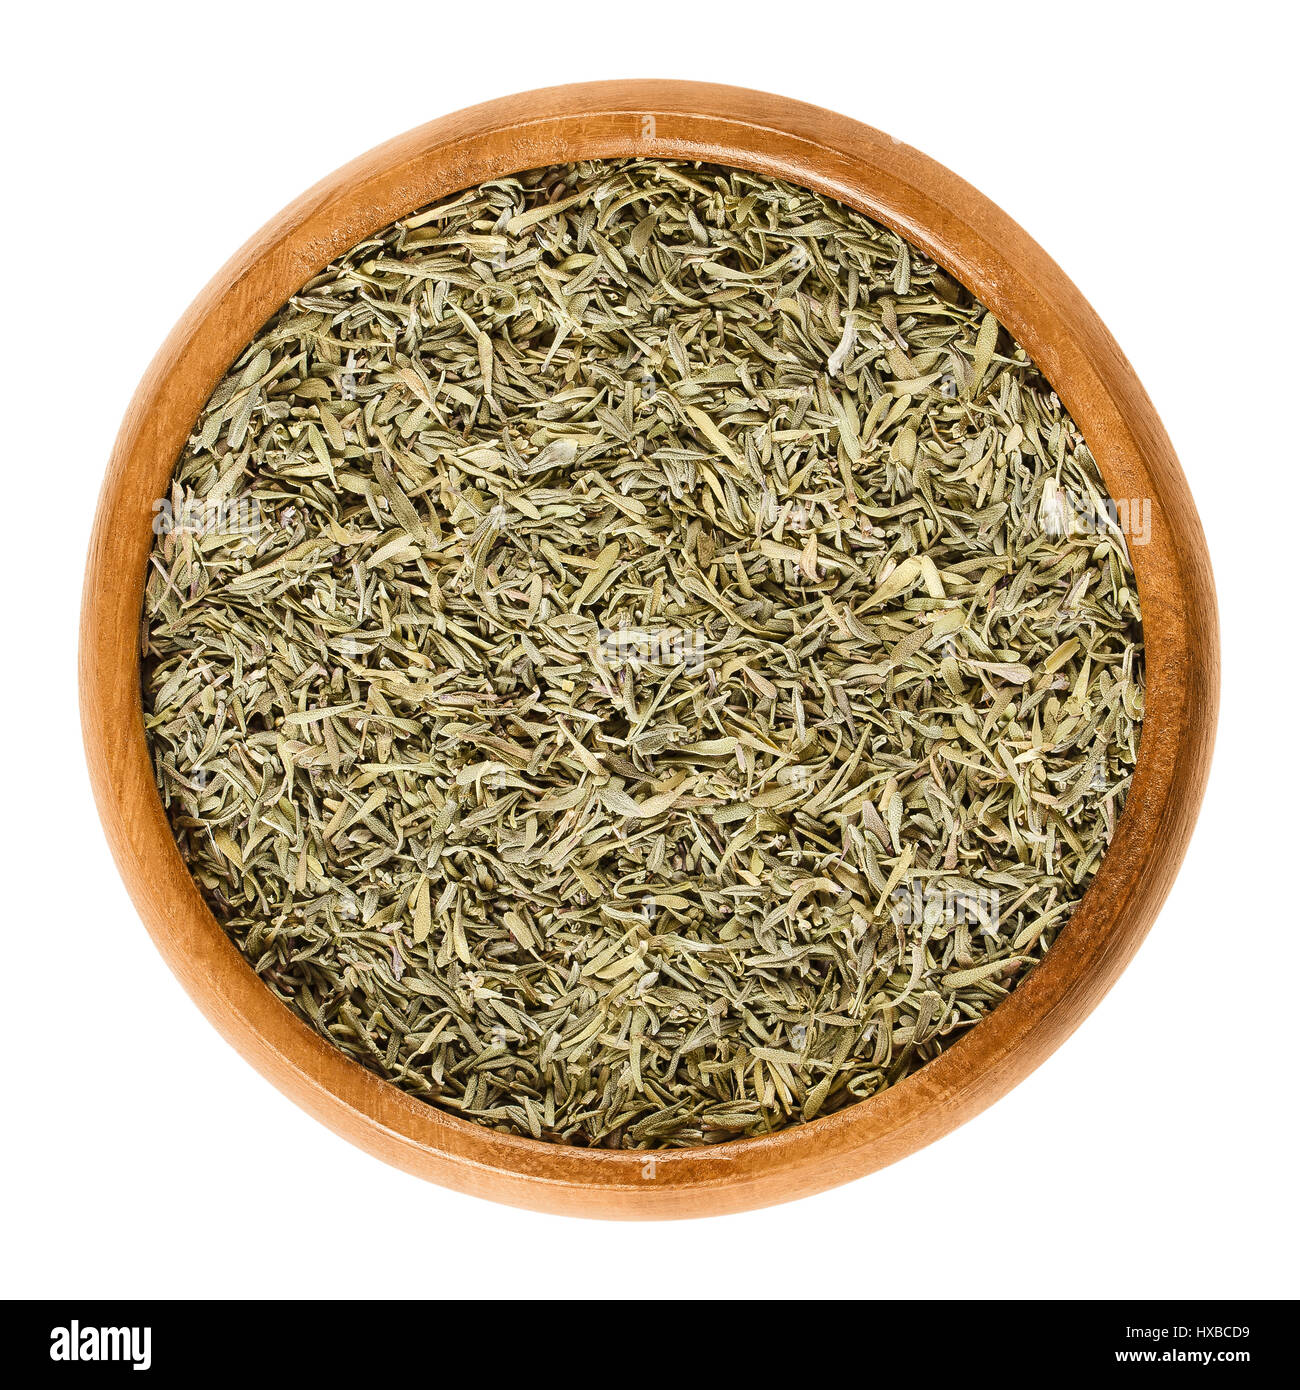 Dried thyme in wooden bowl. Minced stems. Herb with culinary and medicinal uses. Thymus vulgaris is a relative of oregano. Isolated macro photo. Stock Photo